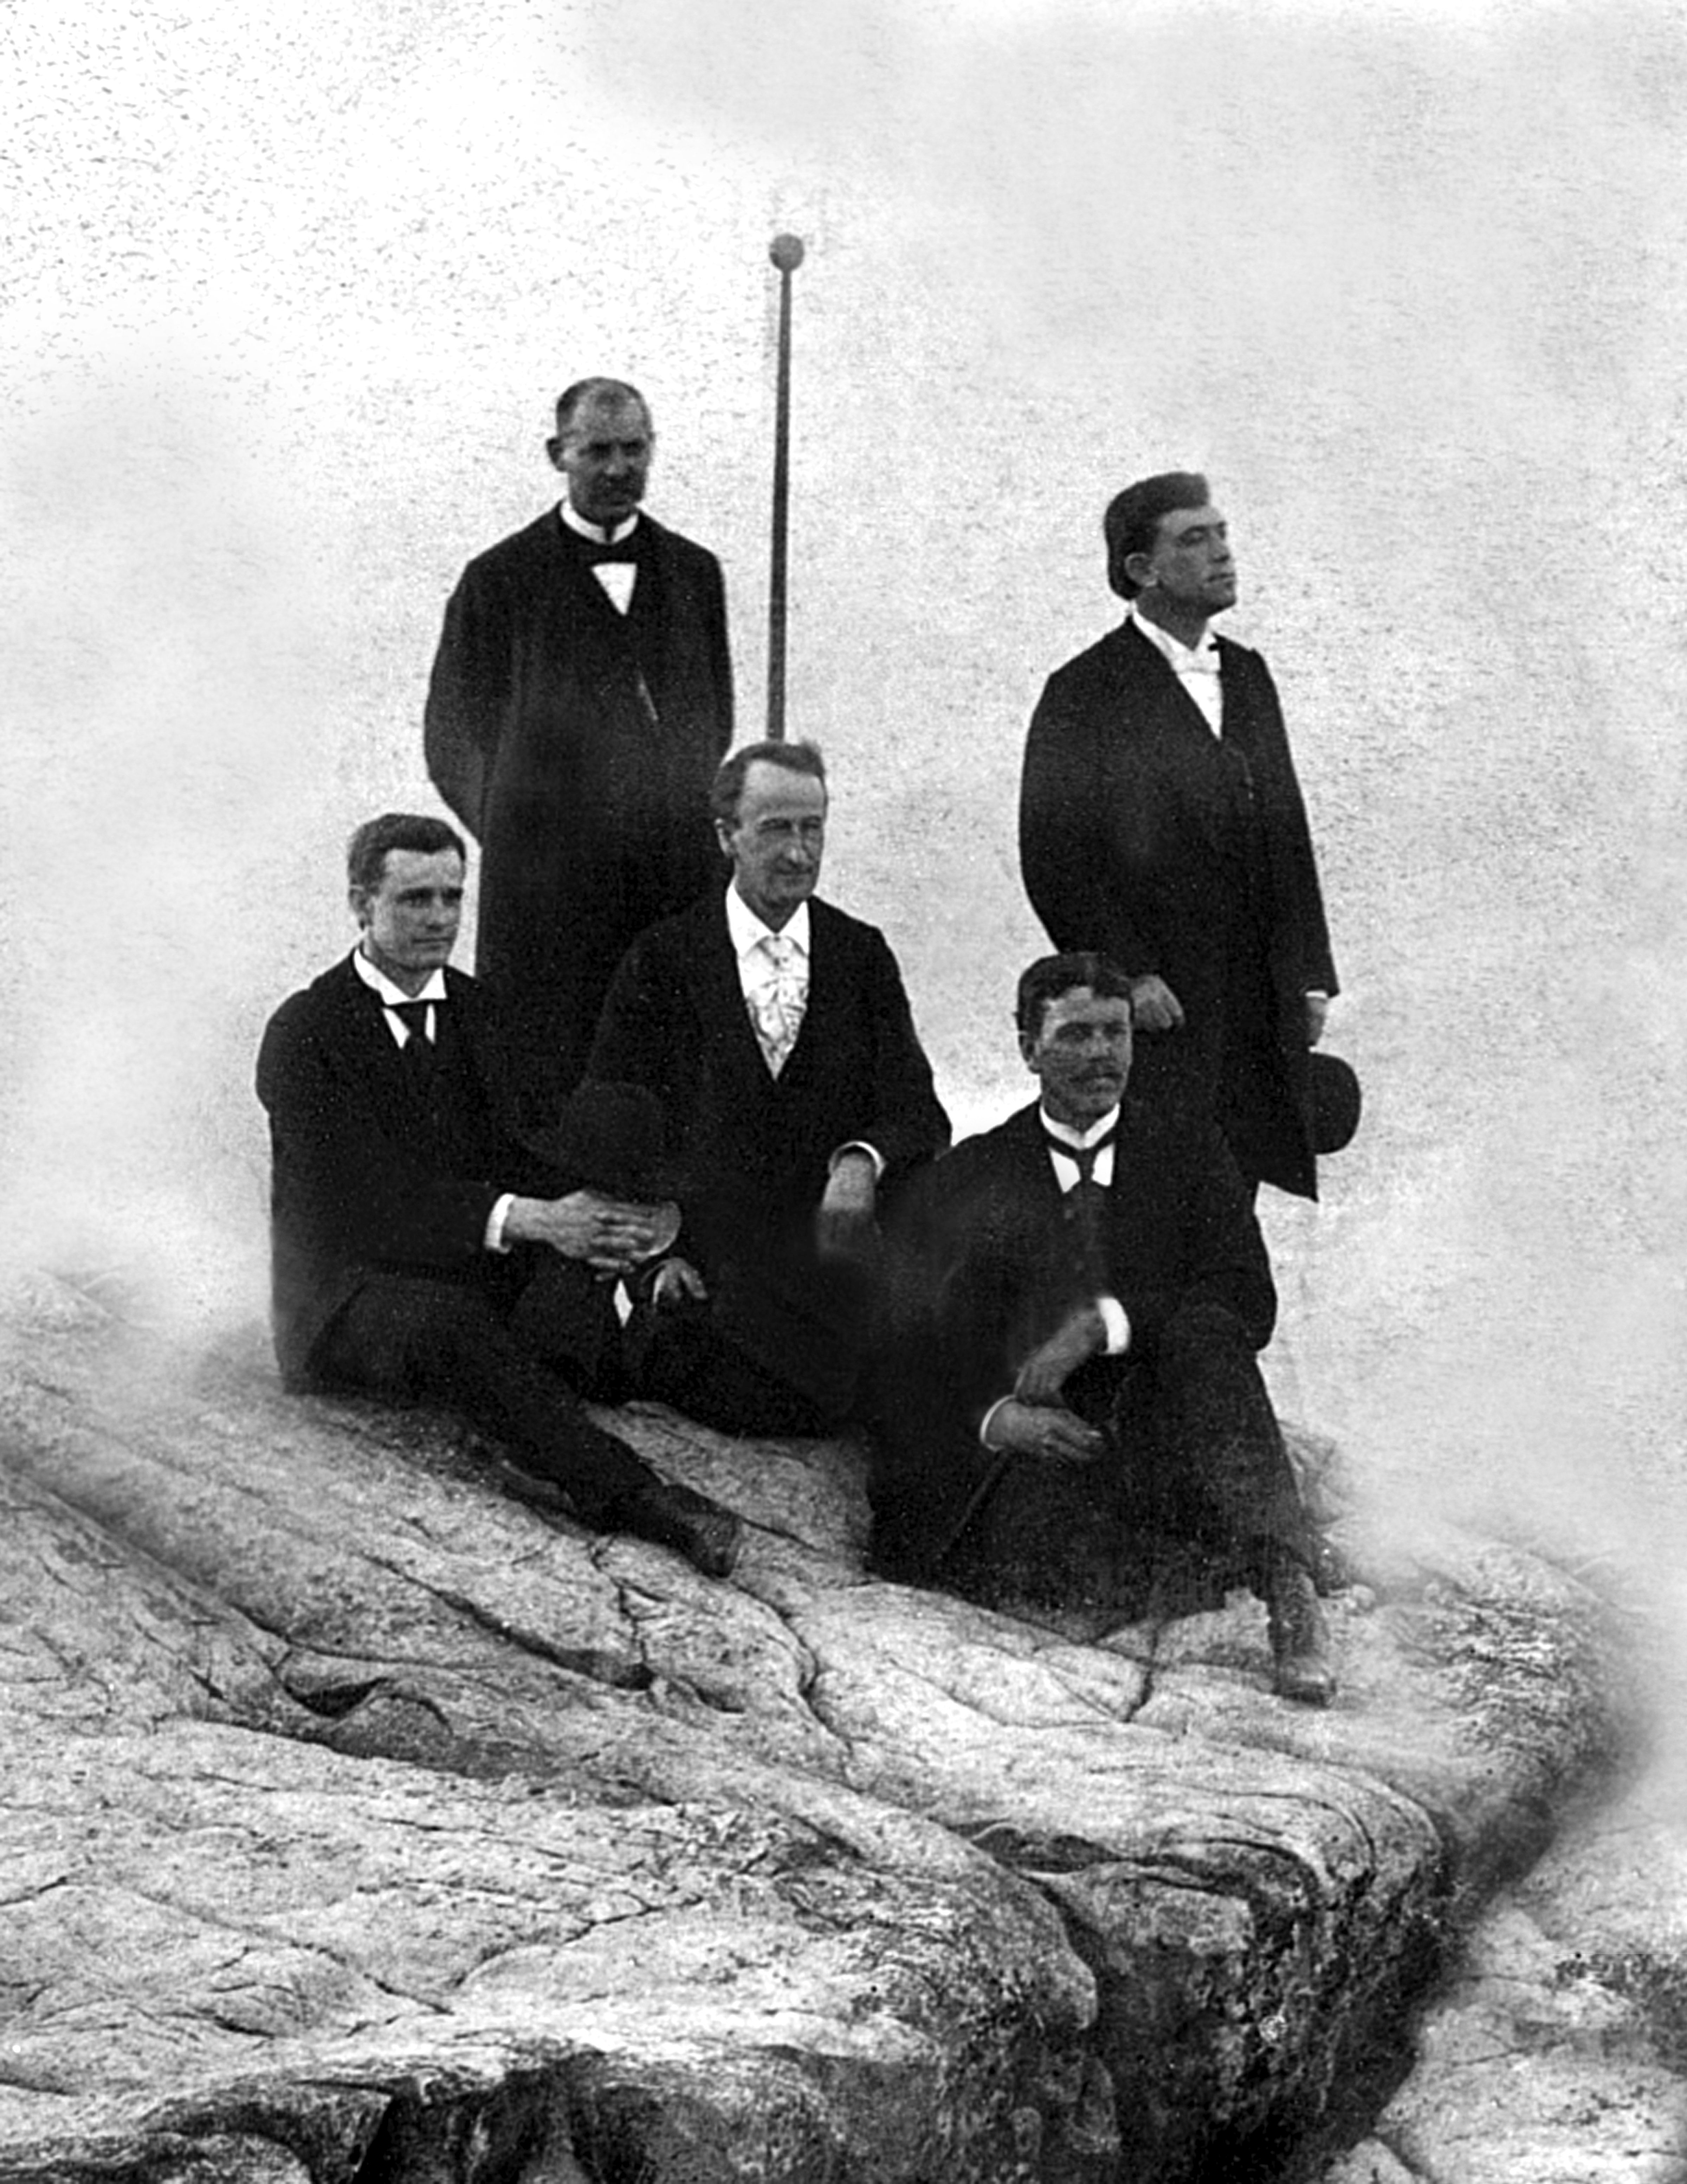 1896 - Elders at Lookout Mountain, Tennessee (Southern States Mission)